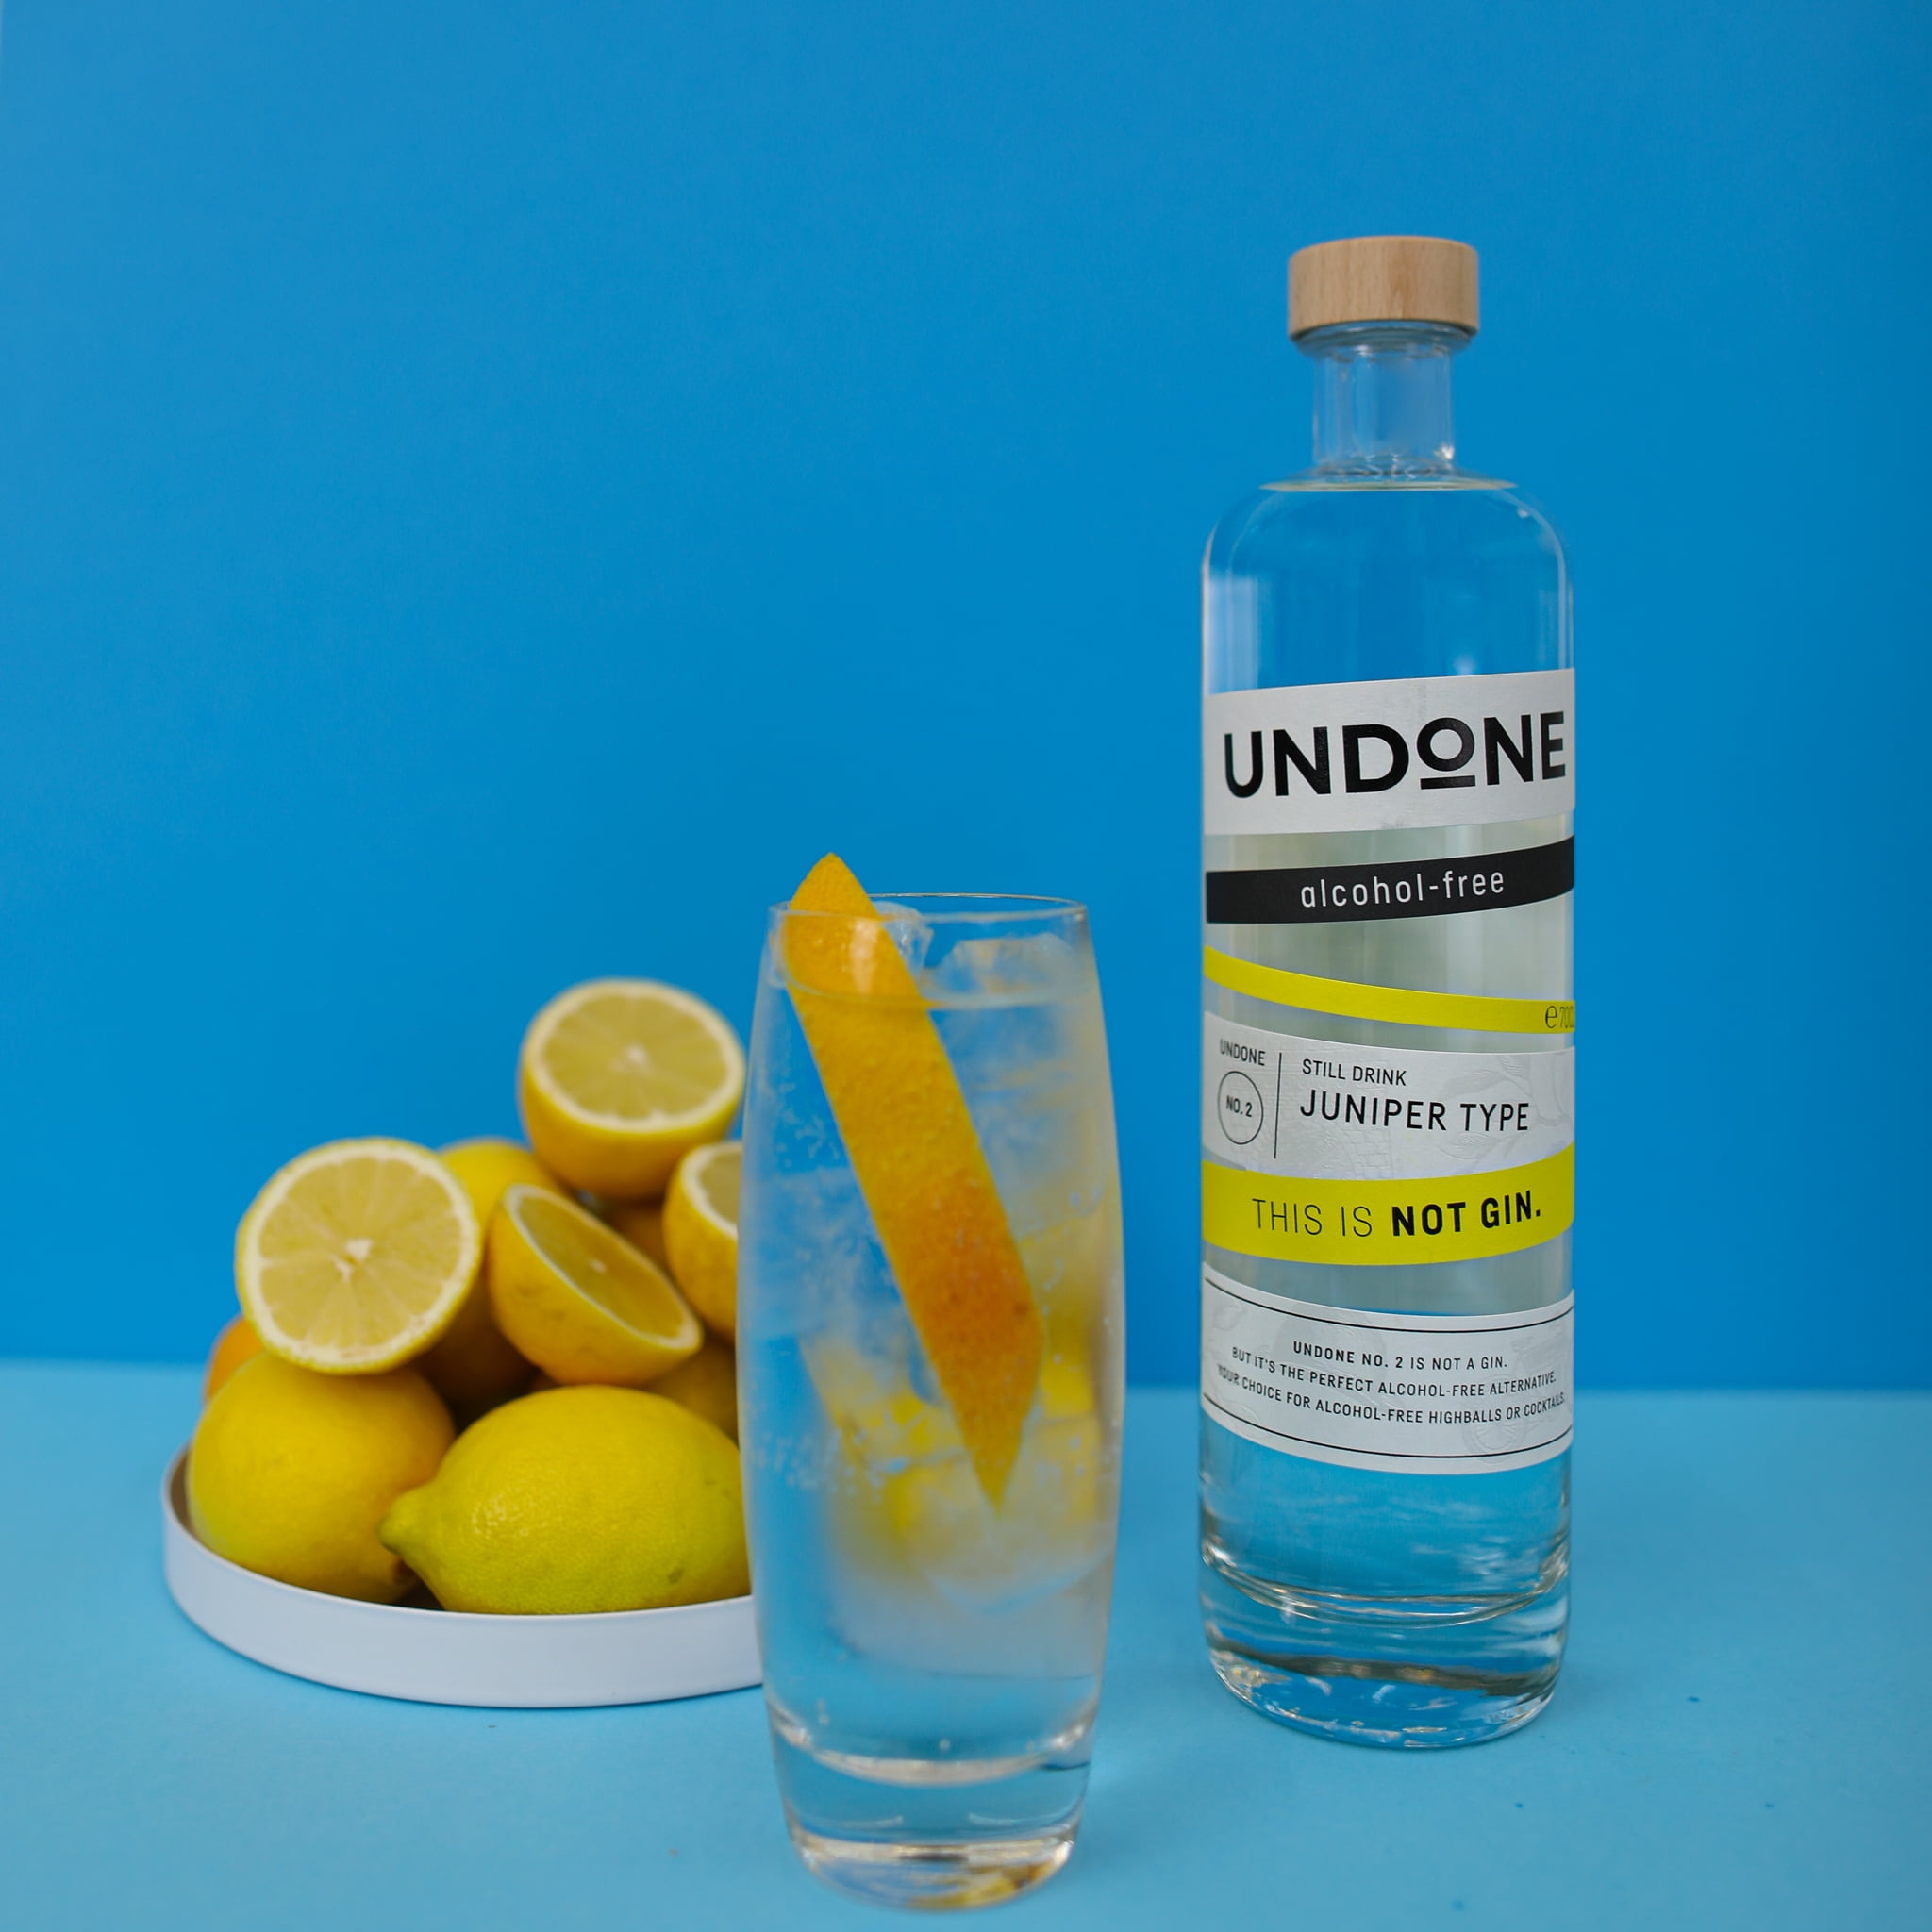 Non-alcoholic THIS Proof Non No.2 IS - mL) GIN Free NOT Gin Type UNDONE Cocktails Juniper Spirits | Alcoholic Alcohol Beverage Zero (750 For Gin Alternative | |